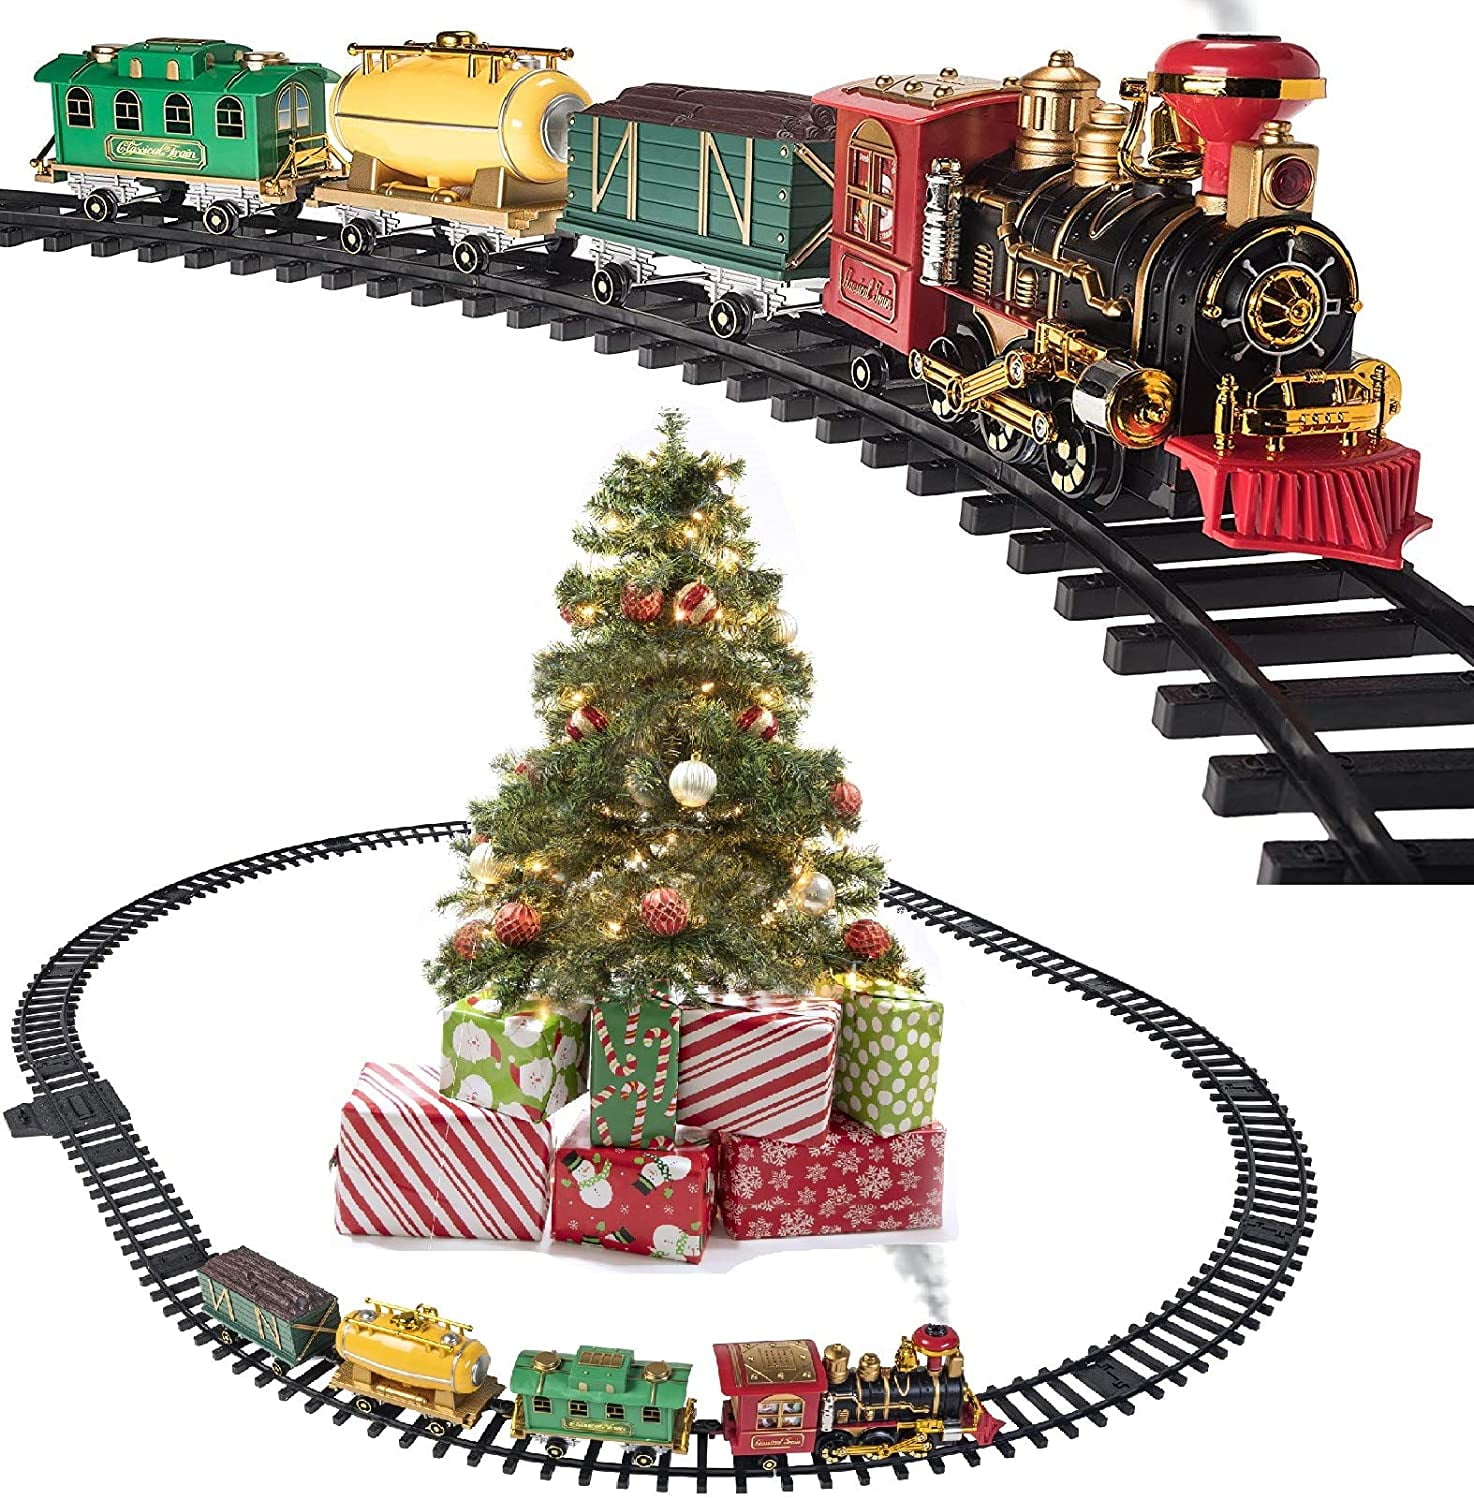 FunLittleToy Christmas Train Set with Lights and Sounds for Under The Tree, 